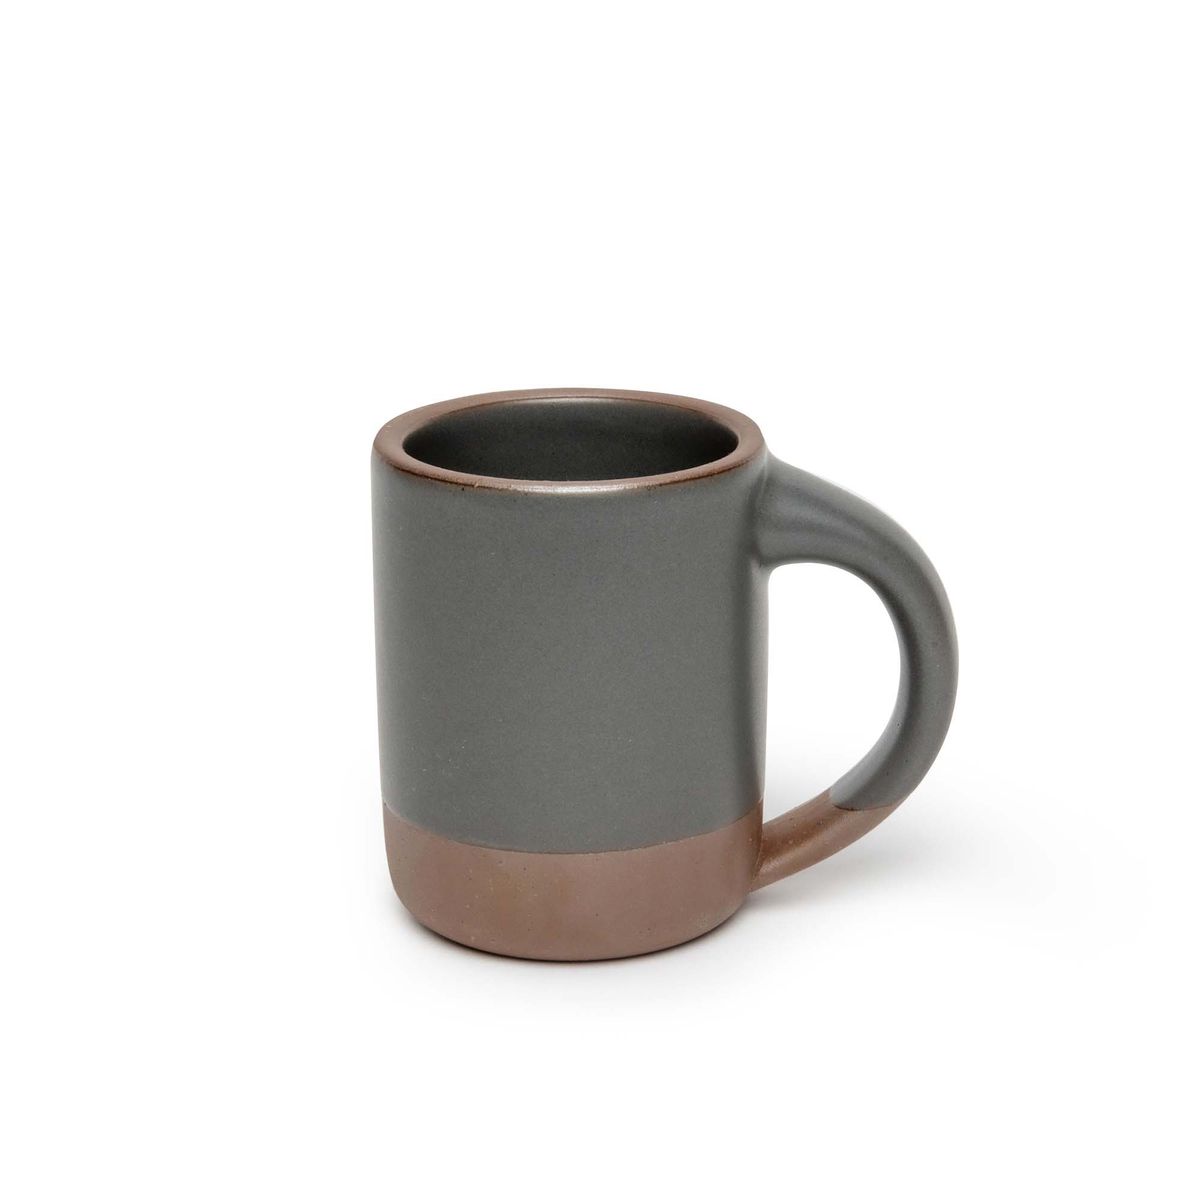 A medium sized ceramic mug with handle in a cool, medium grey color featuring iron speckles and unglazed rim and bottom base.